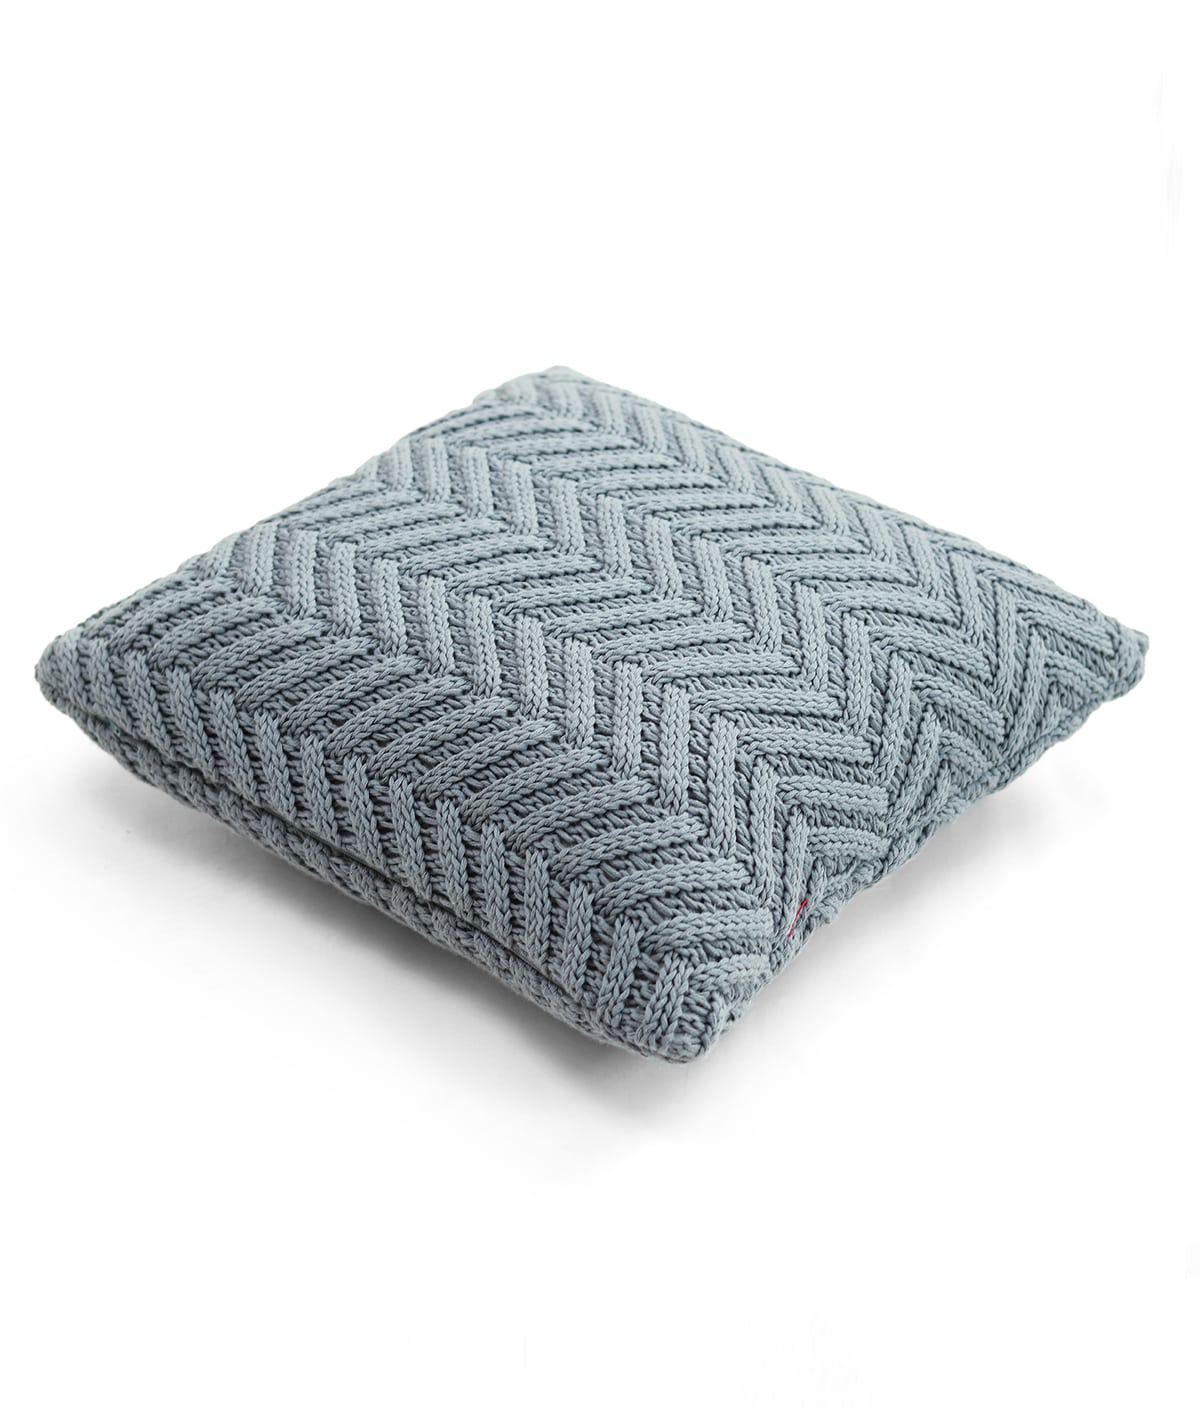 Chevron Blue Grey Cotton Knitted Decorative 16 X 16 Inches Cushion Cover